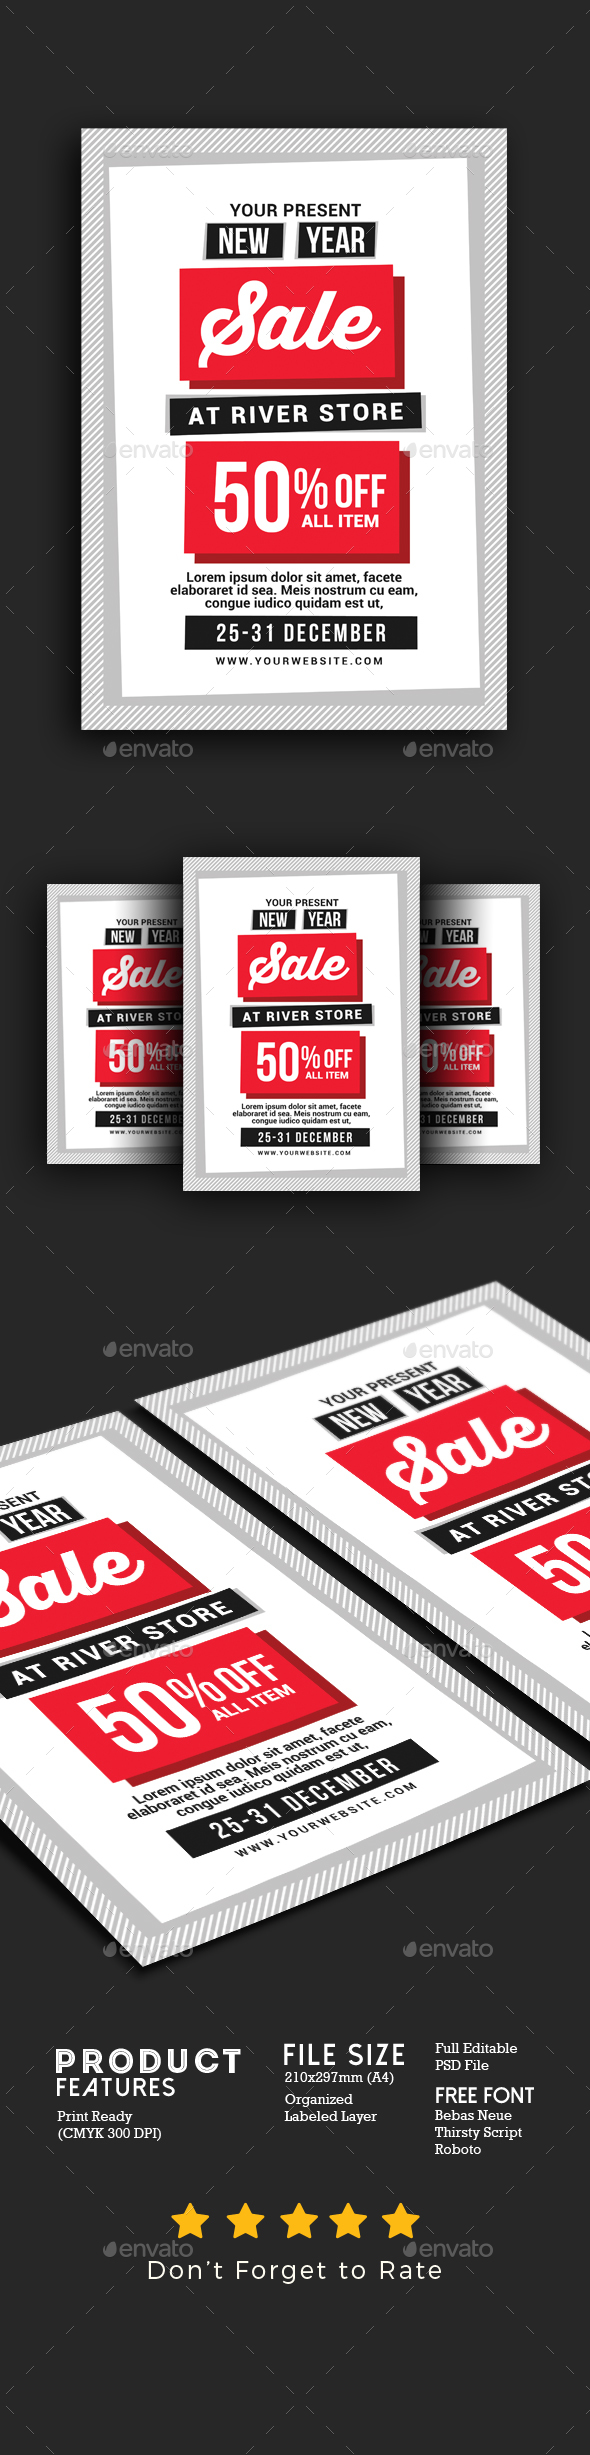 GraphicRiver New Year Sale Flyer 21023461